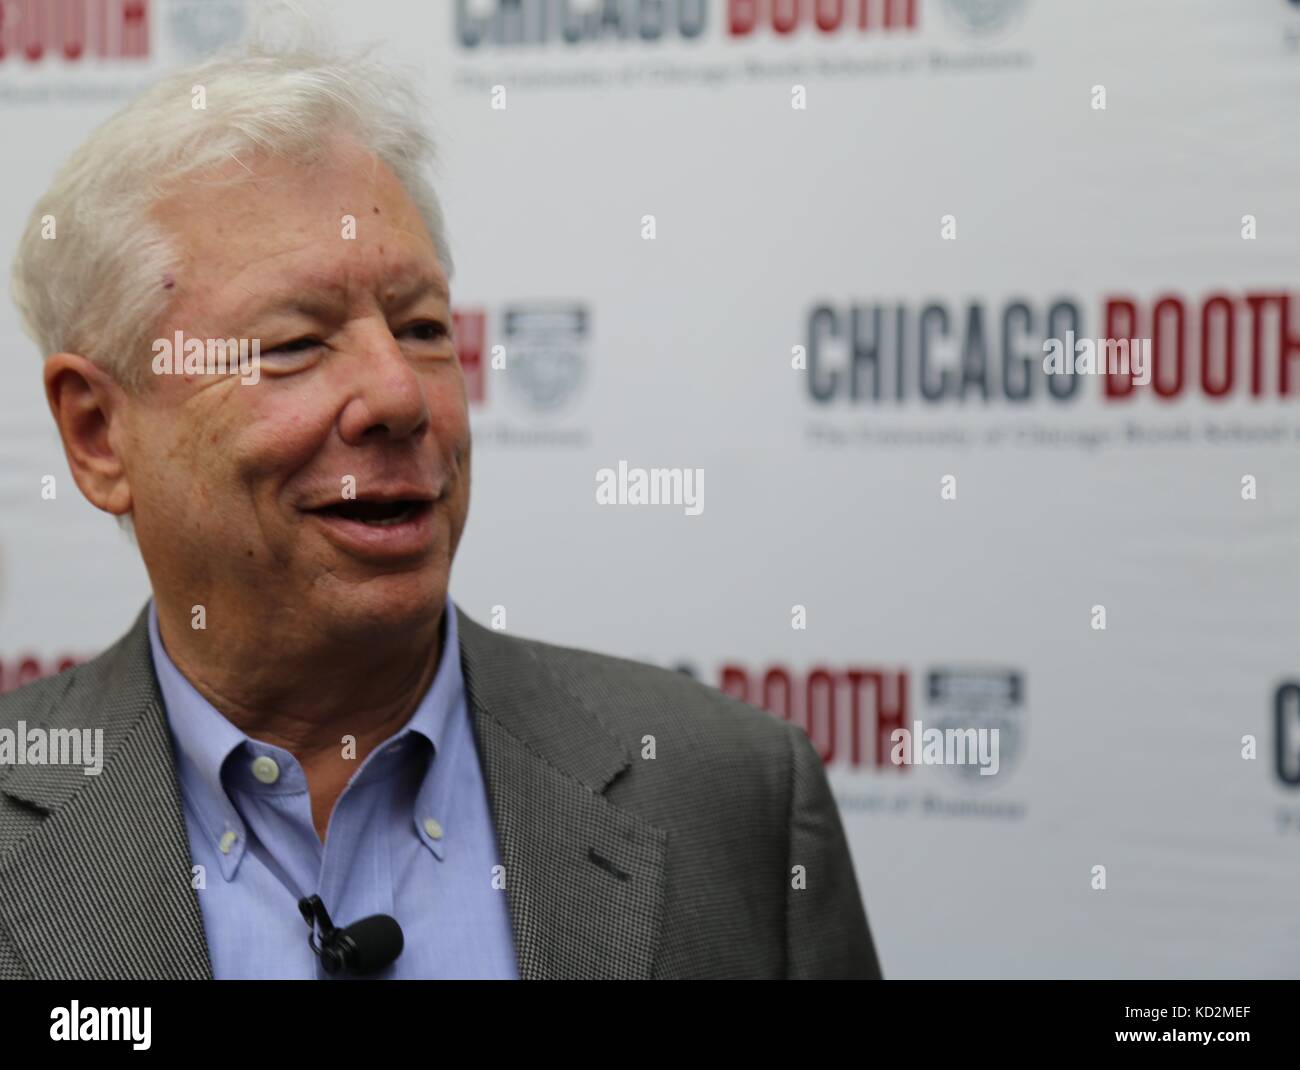 Chicago, USA. 9th Oct, 2017. Richard H. Thaler, 2017 Nobel Prize winner in Economics, attends a press conference at University of Chicago Booth School of Business in Chicago, the United States, on Oct. 9, 2017. The 2017 Nobel Prize in Economics was awarded to Richard H. Thaler 'for his contributions to behavioural economics,' announced the Royal Swedish Academy of Sciences on Monday. Credit: Wang Qiang/Xinhua/Alamy Live News Stock Photo